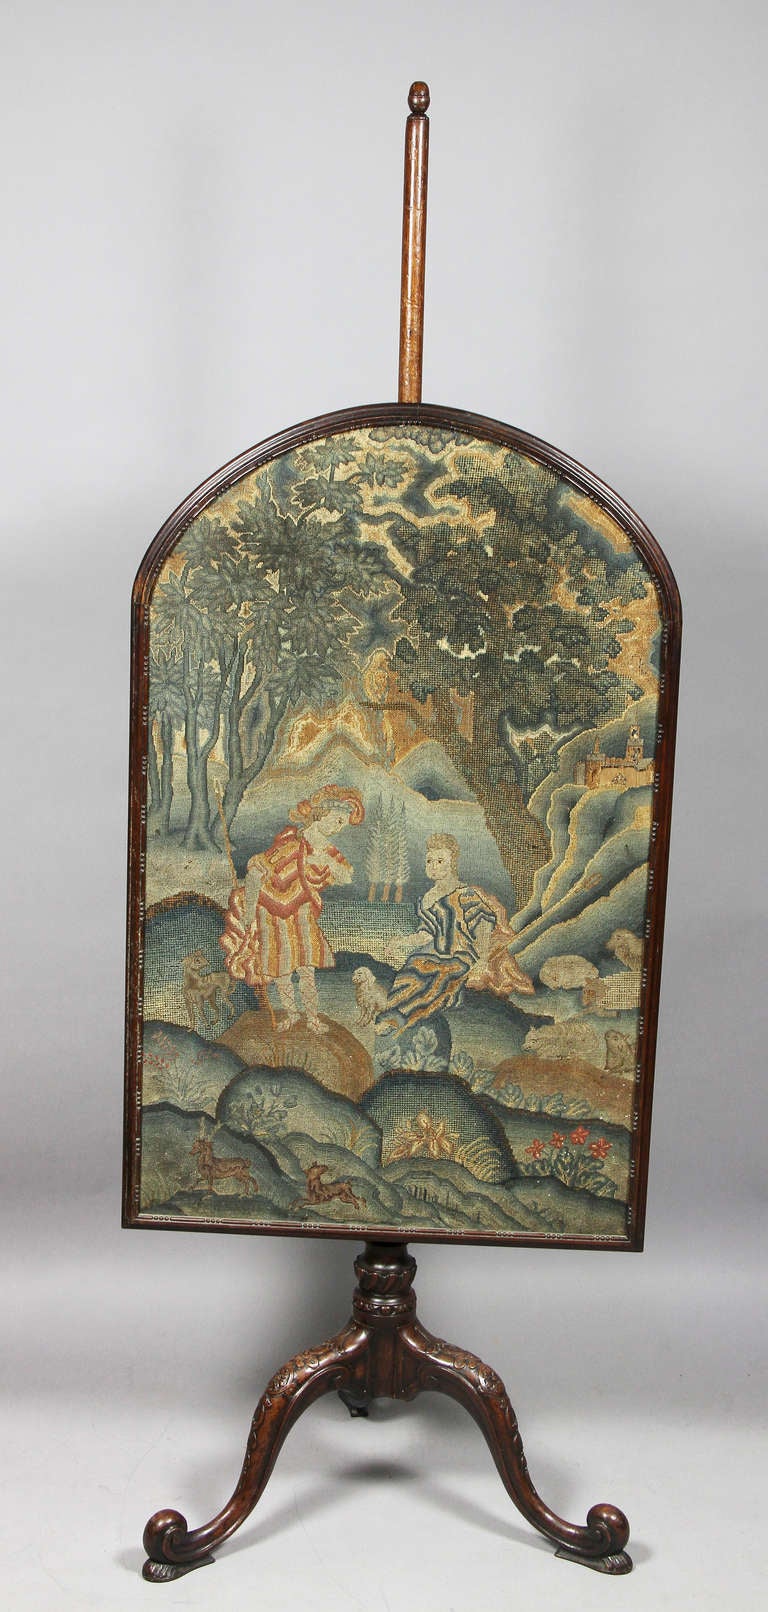 18th century needlepoint panel with two figures in a landscape, raised on a finely carved support with tripartite legs with scroll feet.